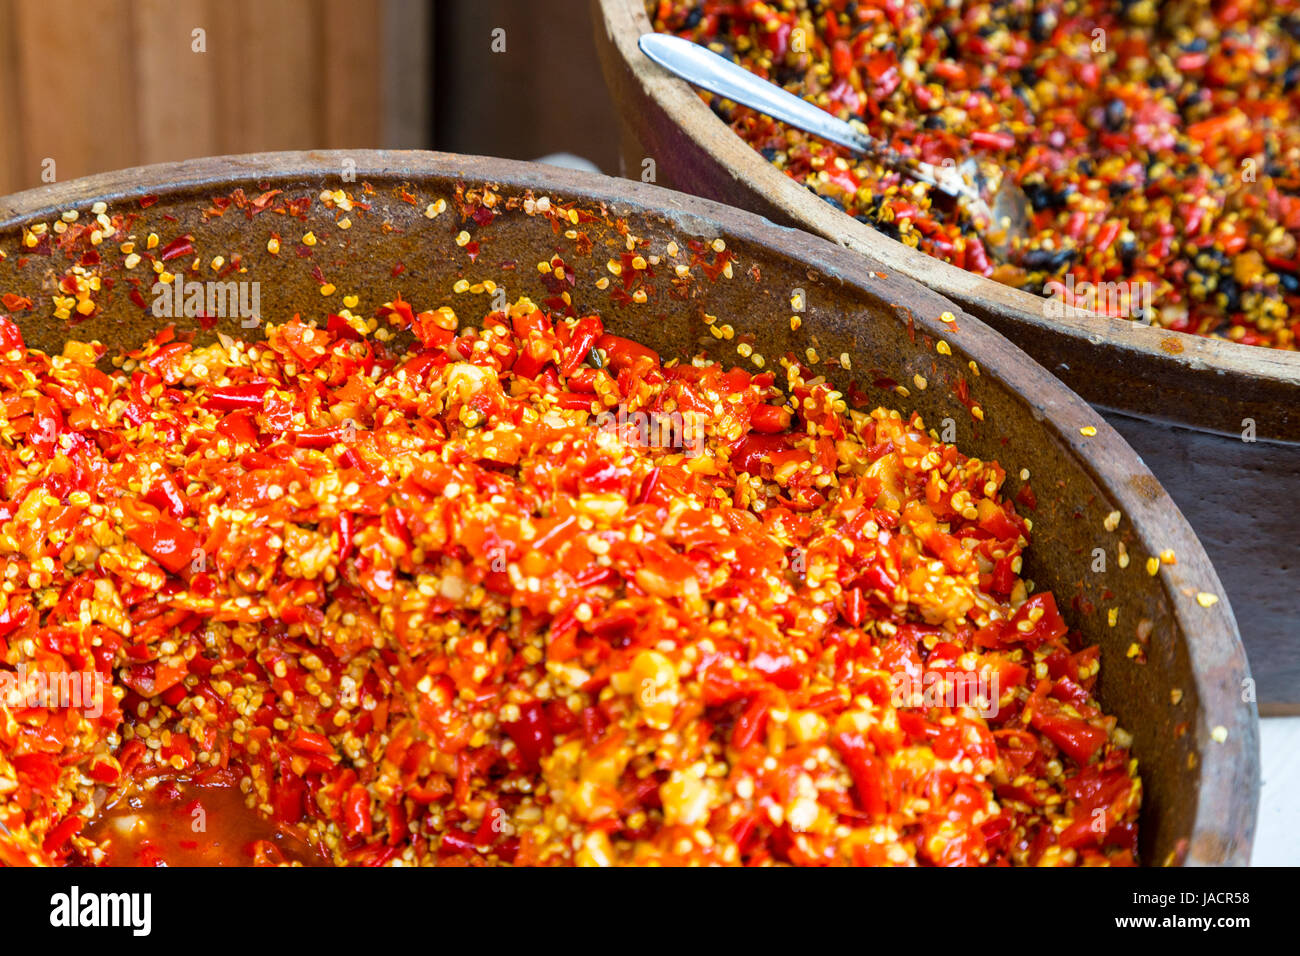 Yangshuo, China.  Chopped-up Chili Peppers for Sale. Stock Photo